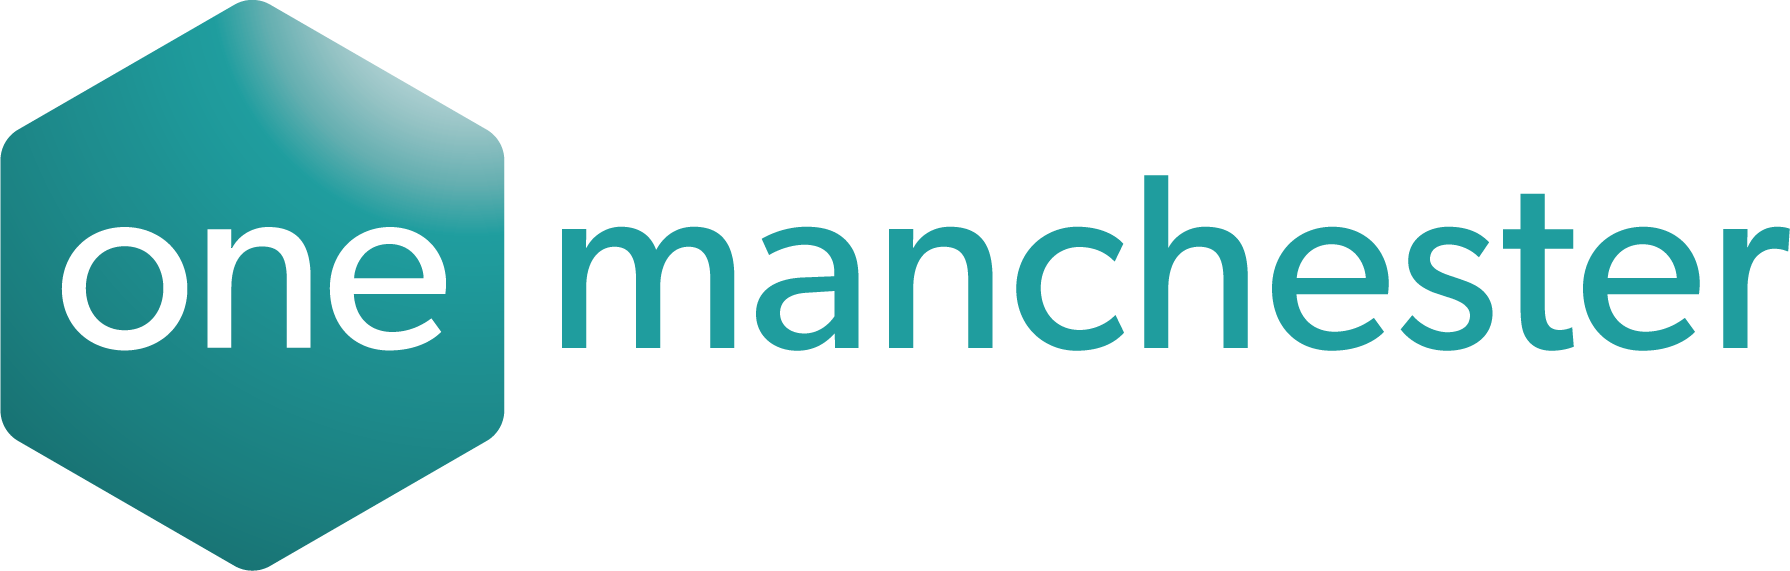 logo for One Manchester